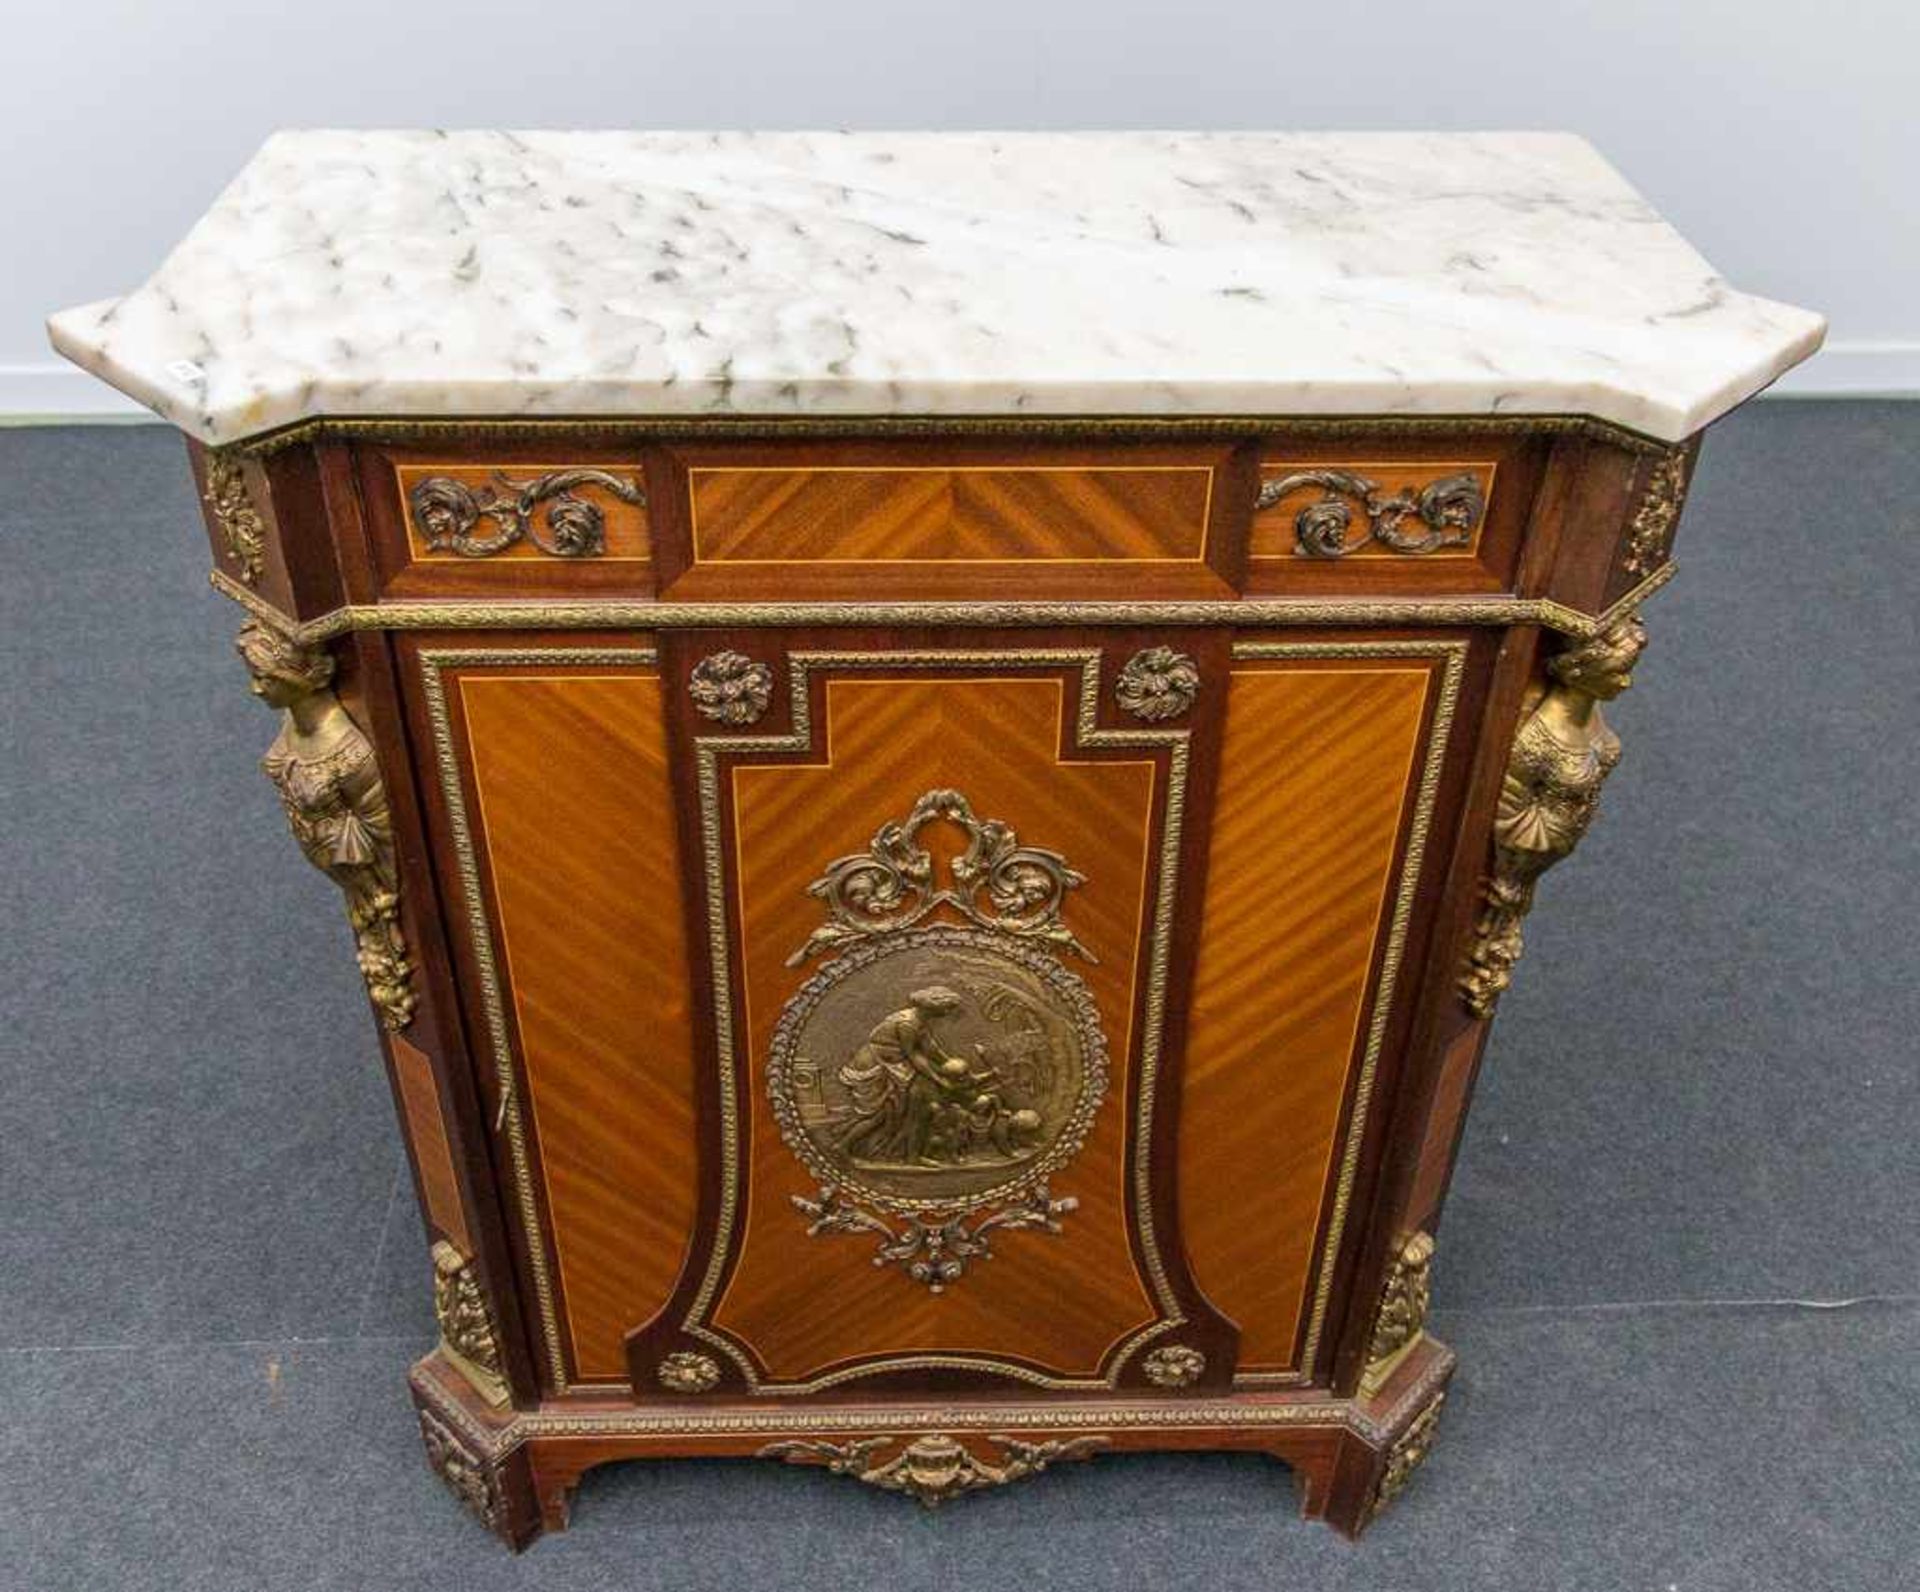 Commode with marquetry inlay - Image 13 of 15